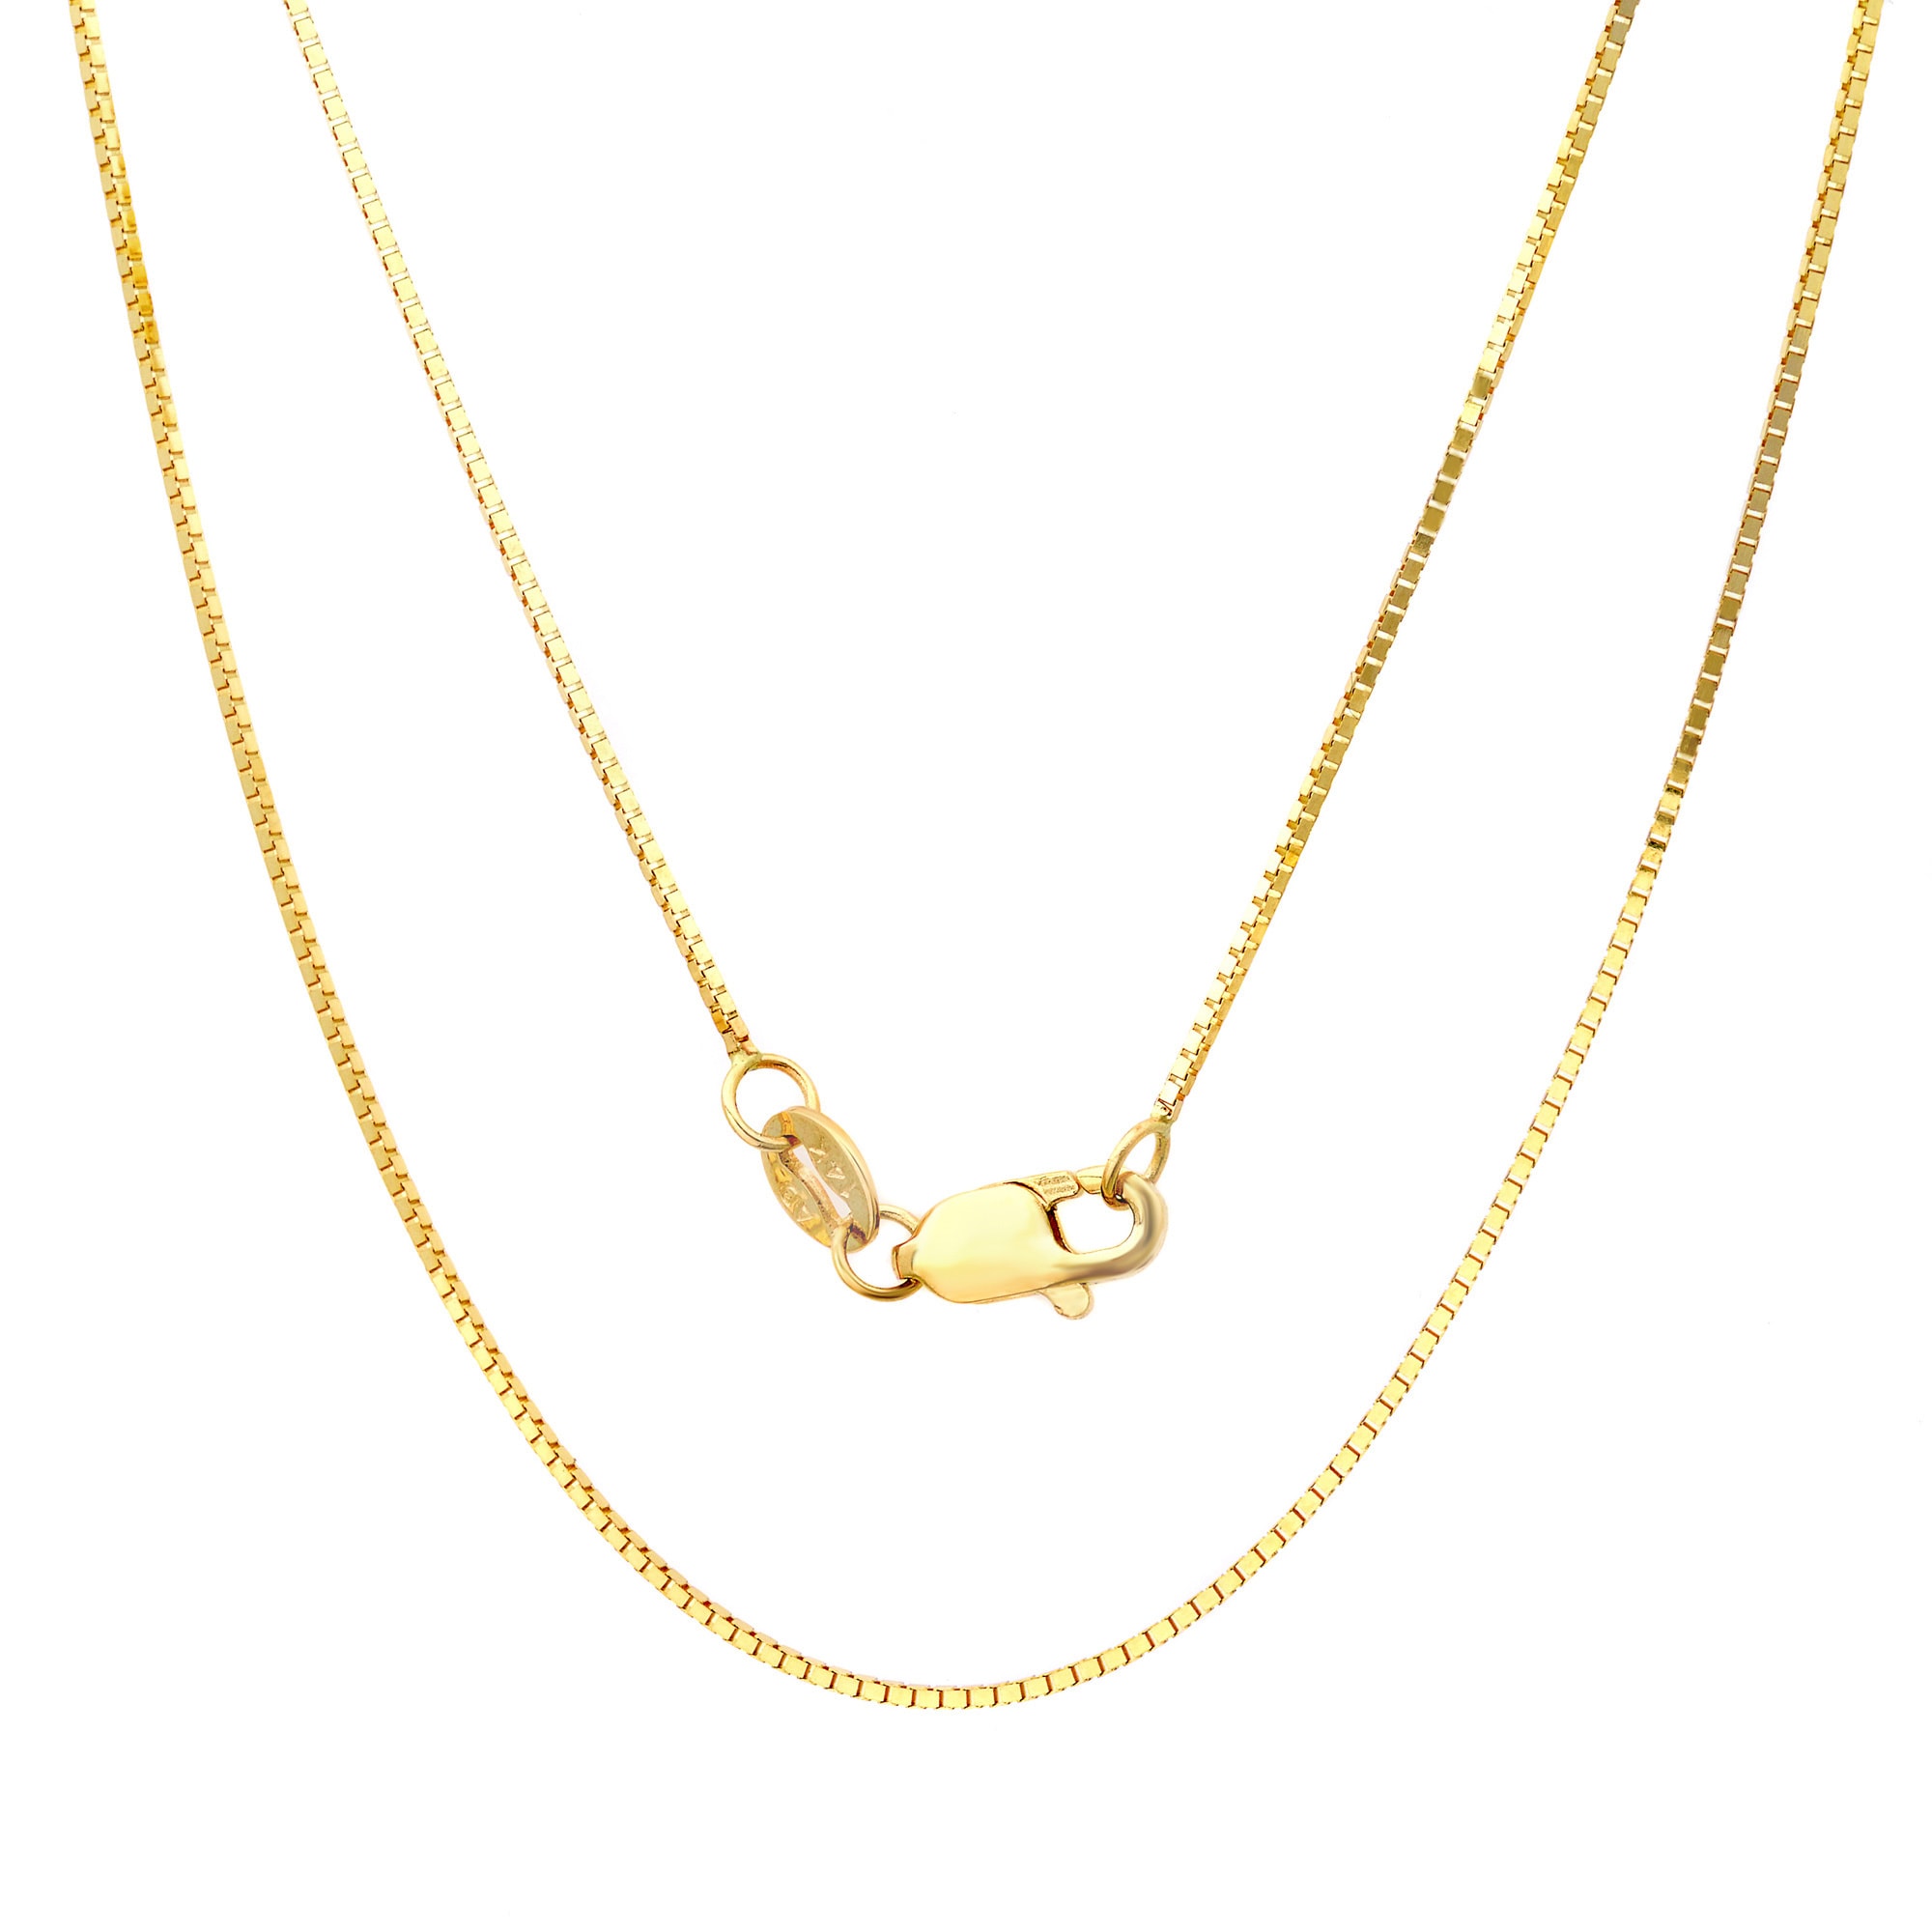 long gold chain necklace with pendant